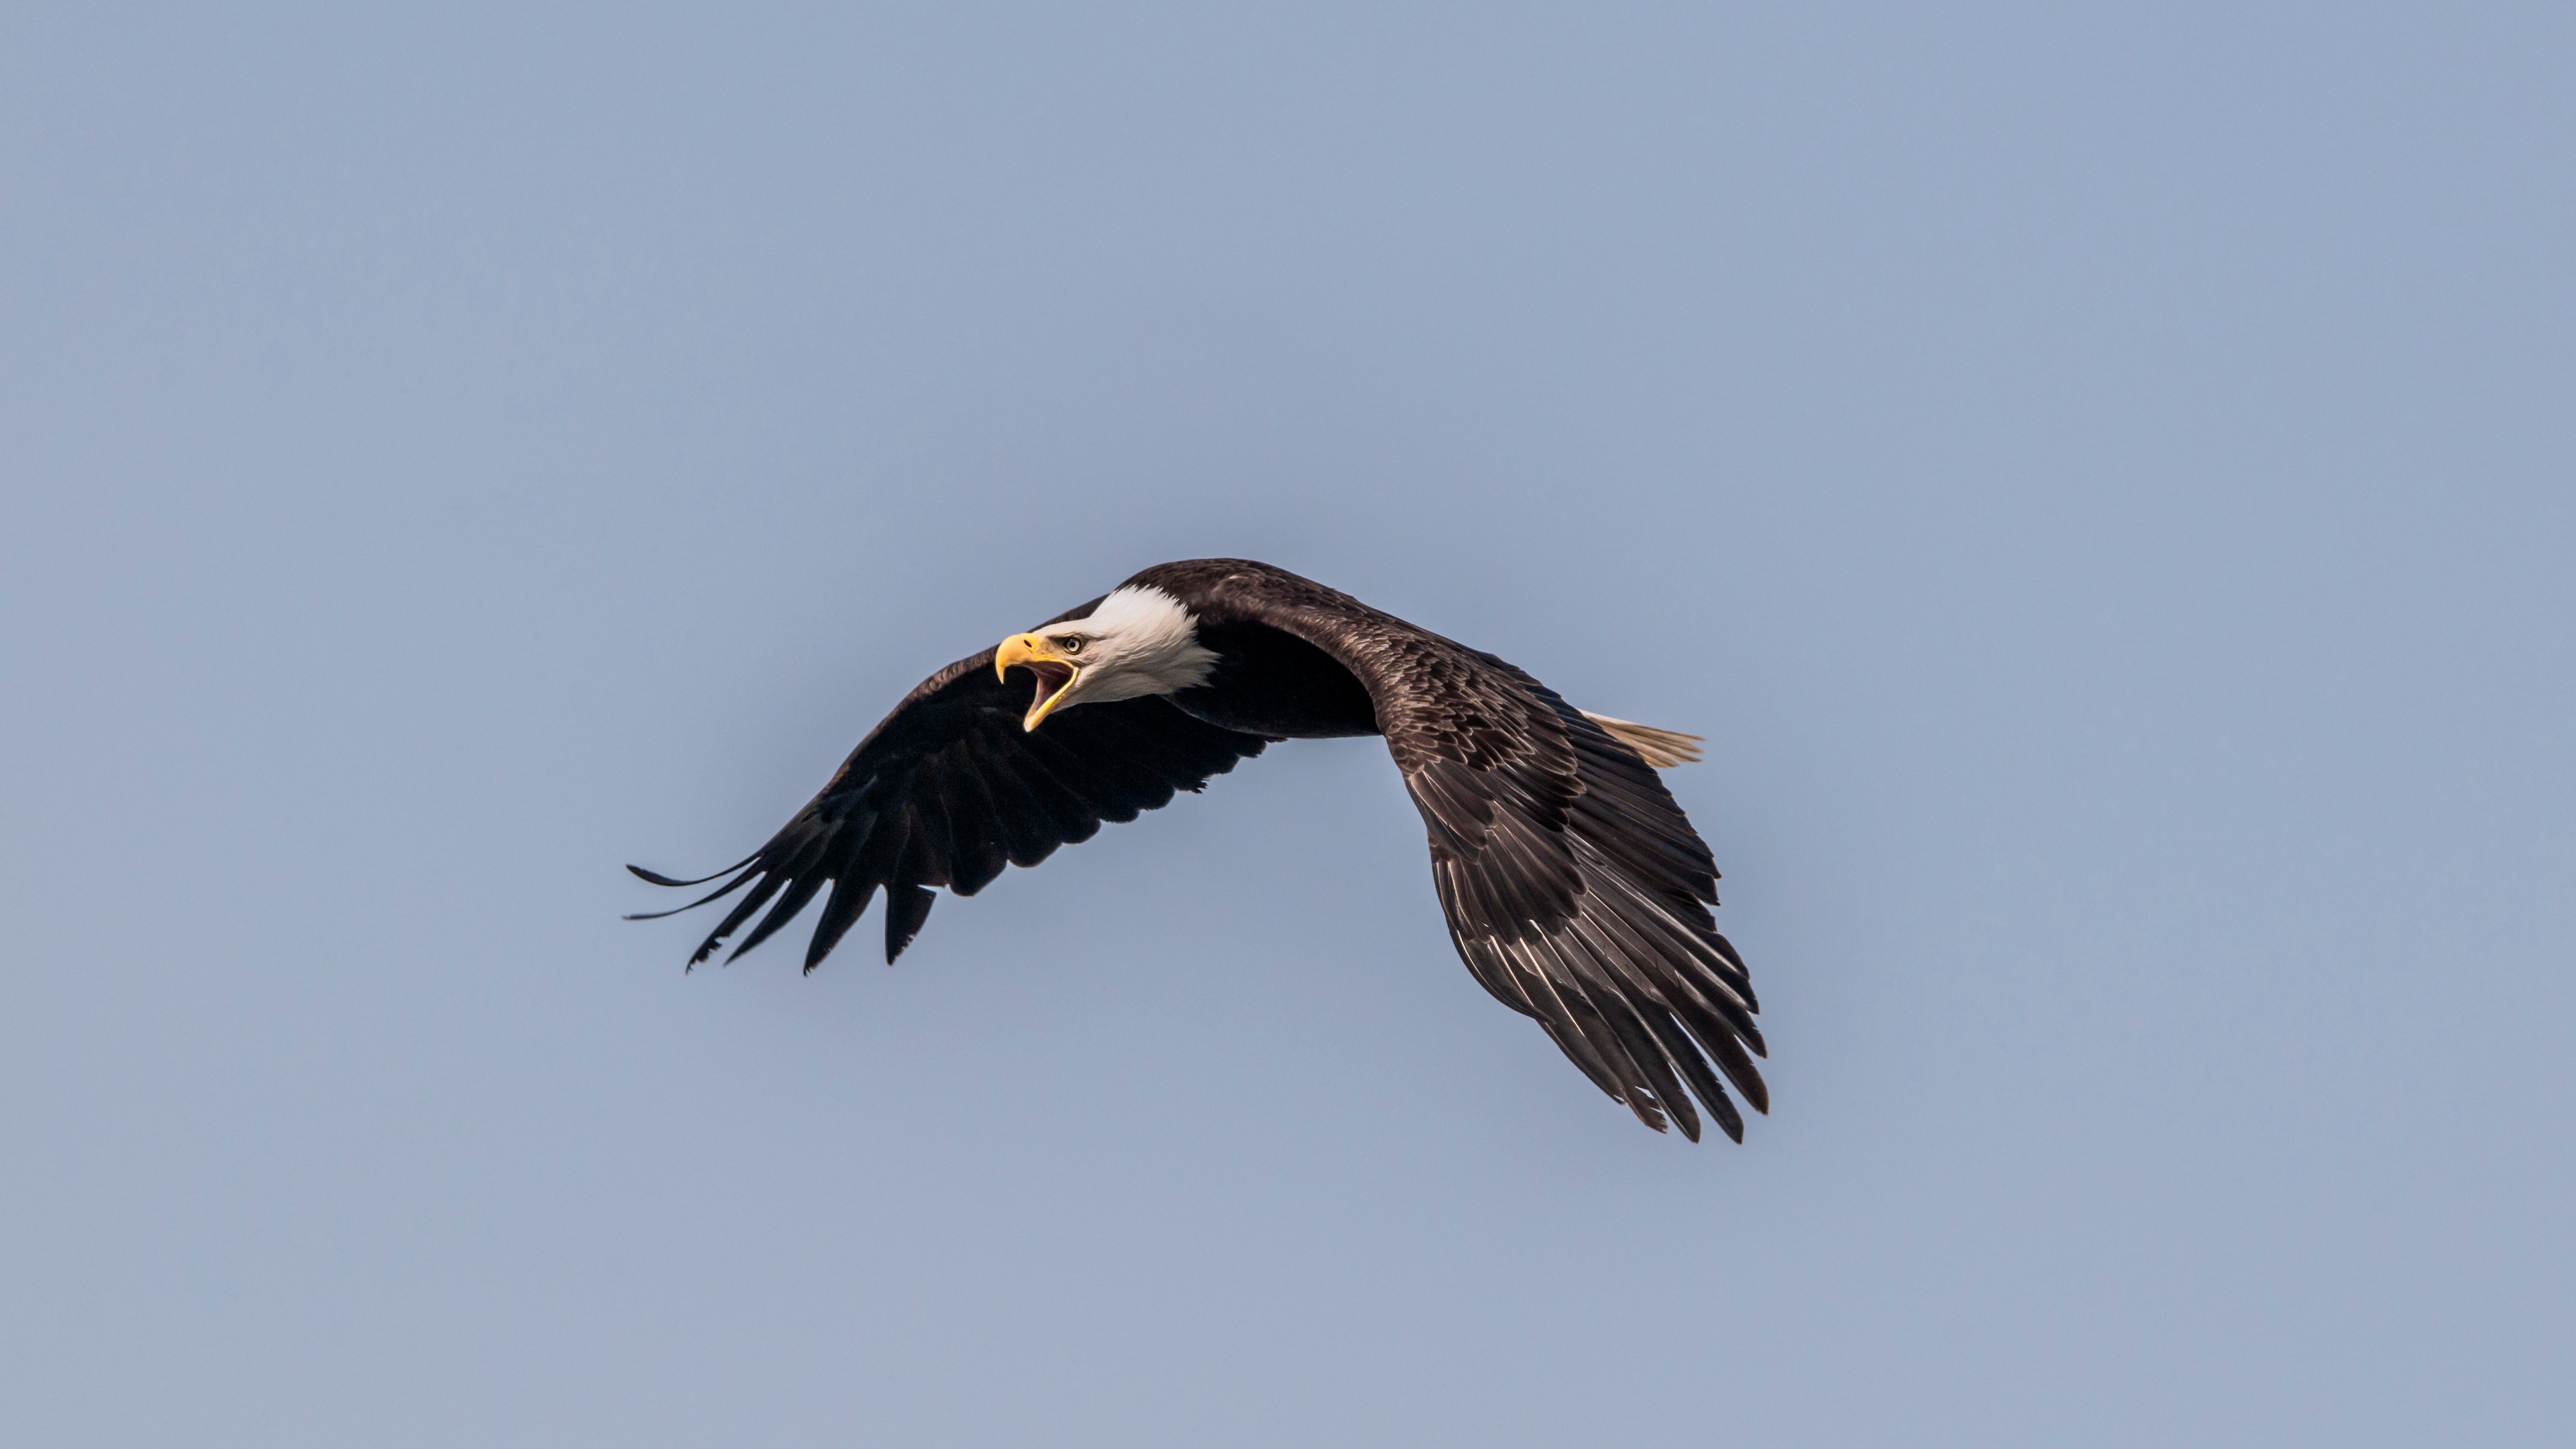 A bald eagle in flight with its mouth open.